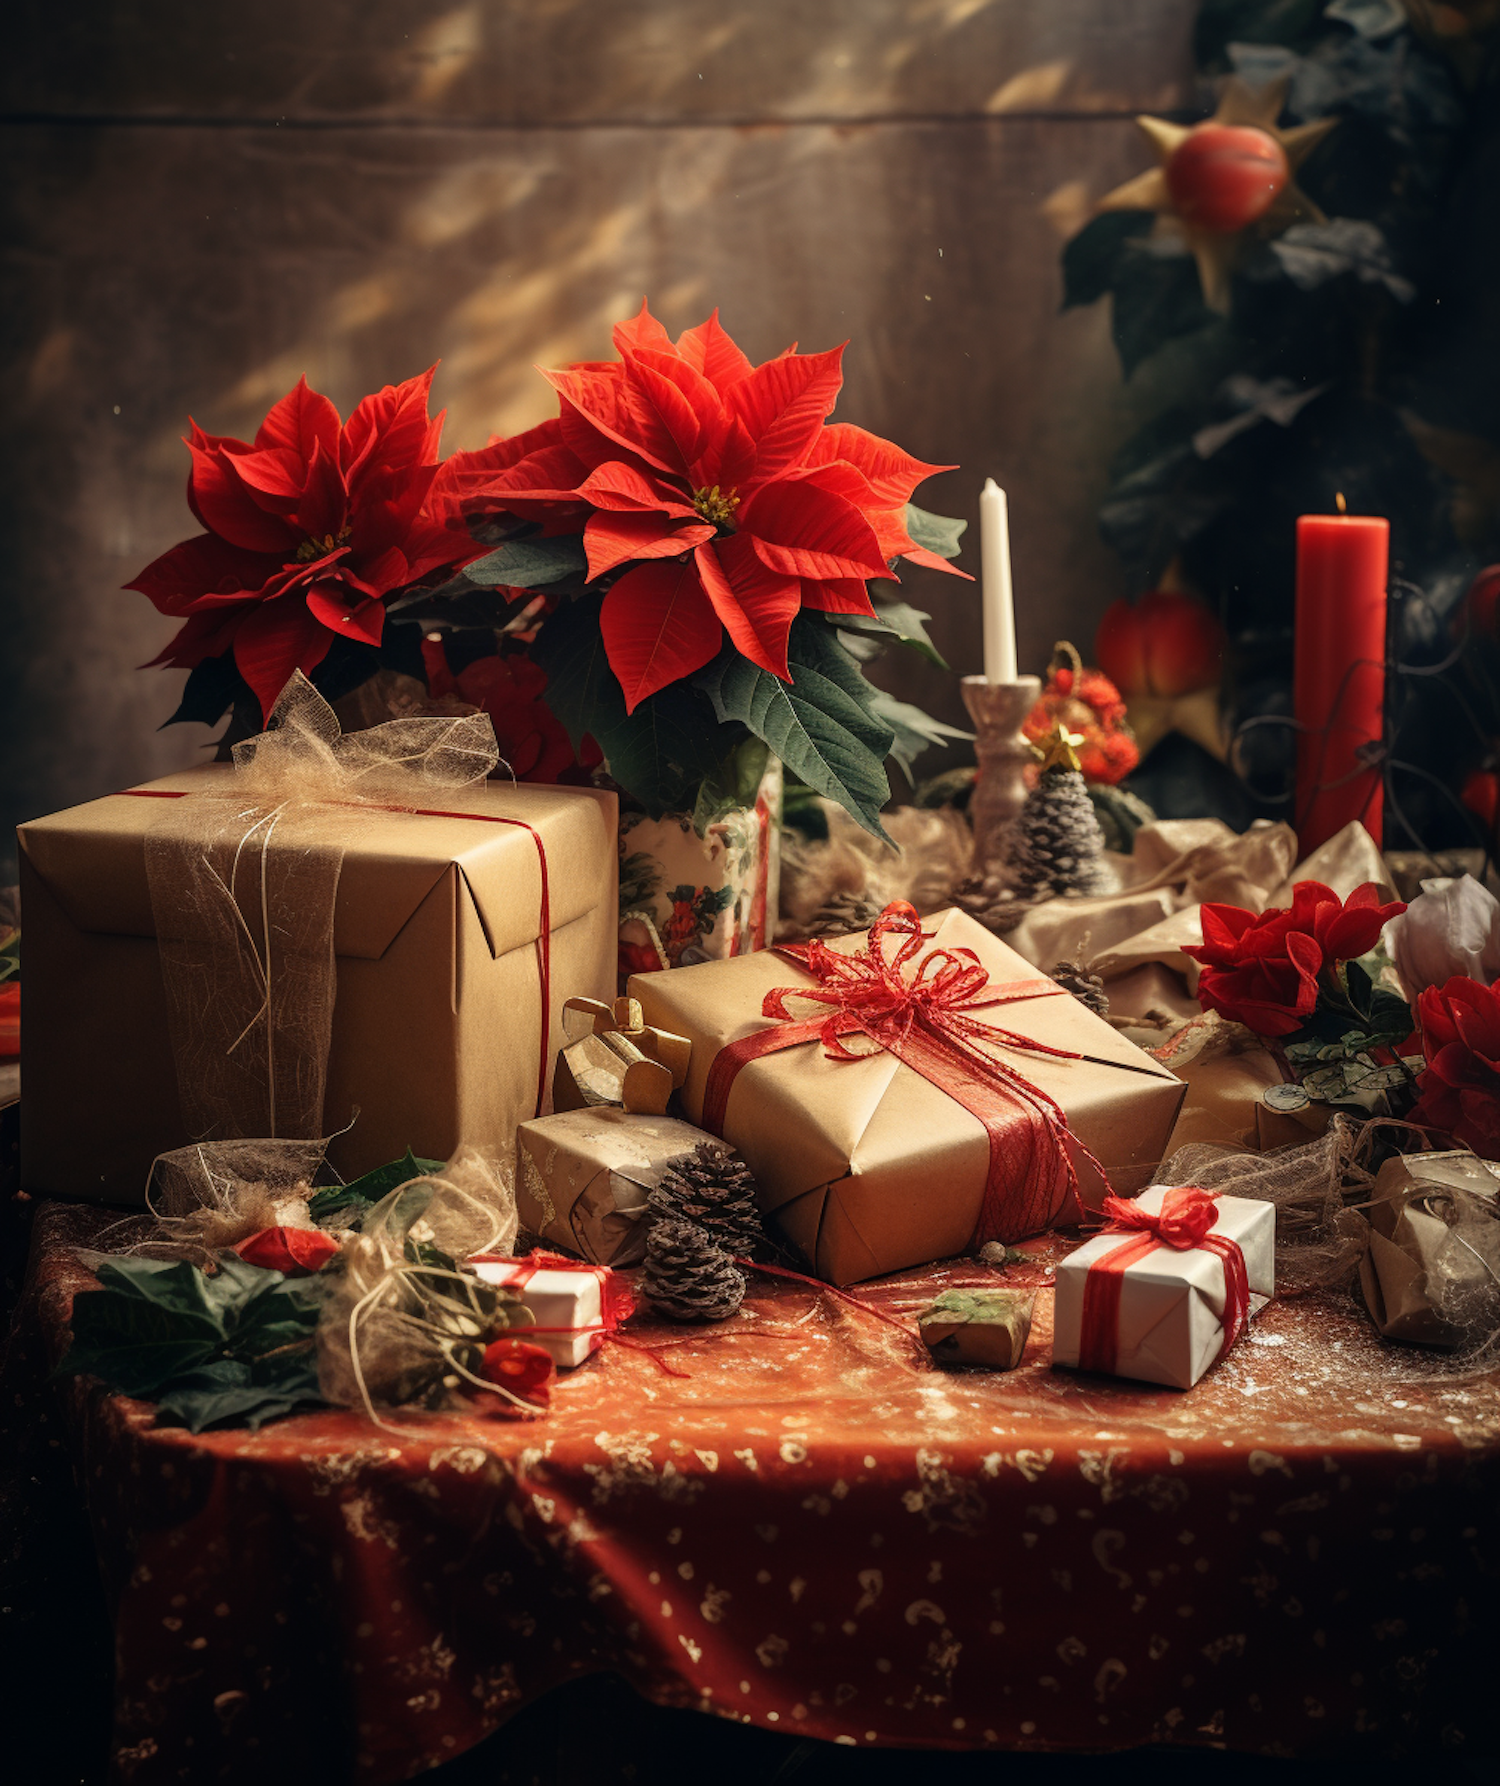 Christmas Still Life with Festive Gifts and Decorations